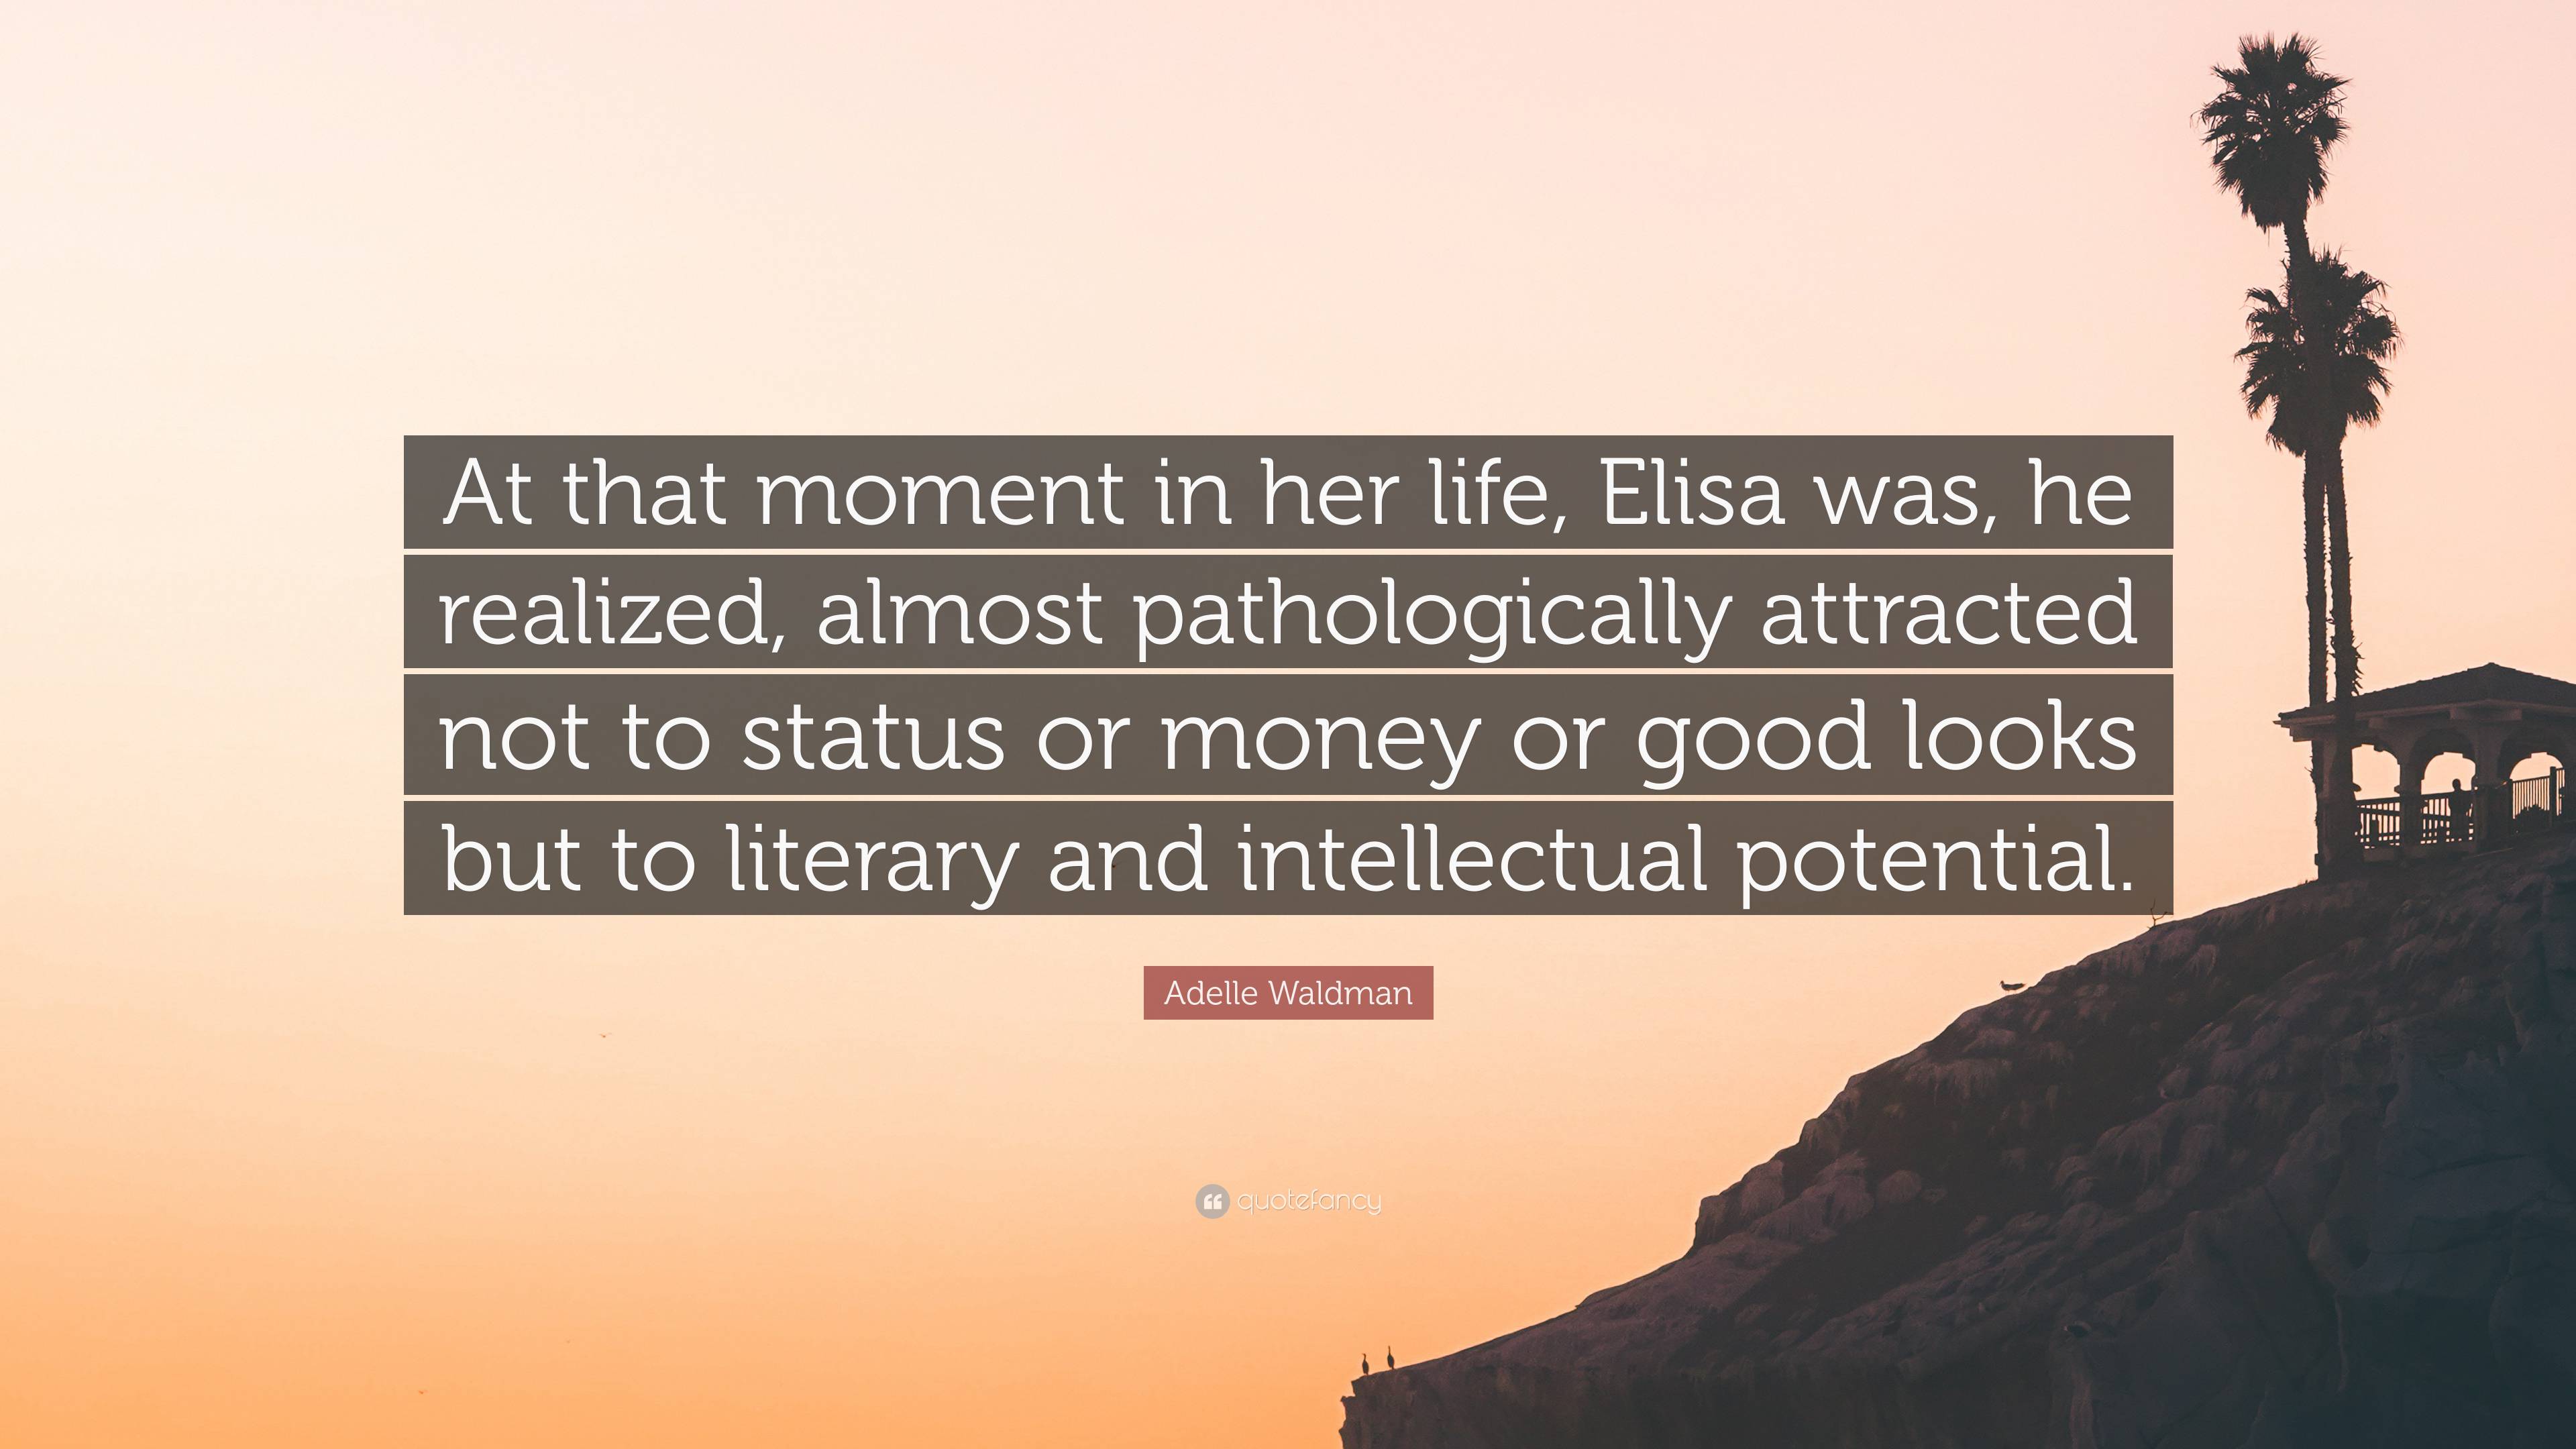 Adelle Waldman Quote: “At that moment in her life